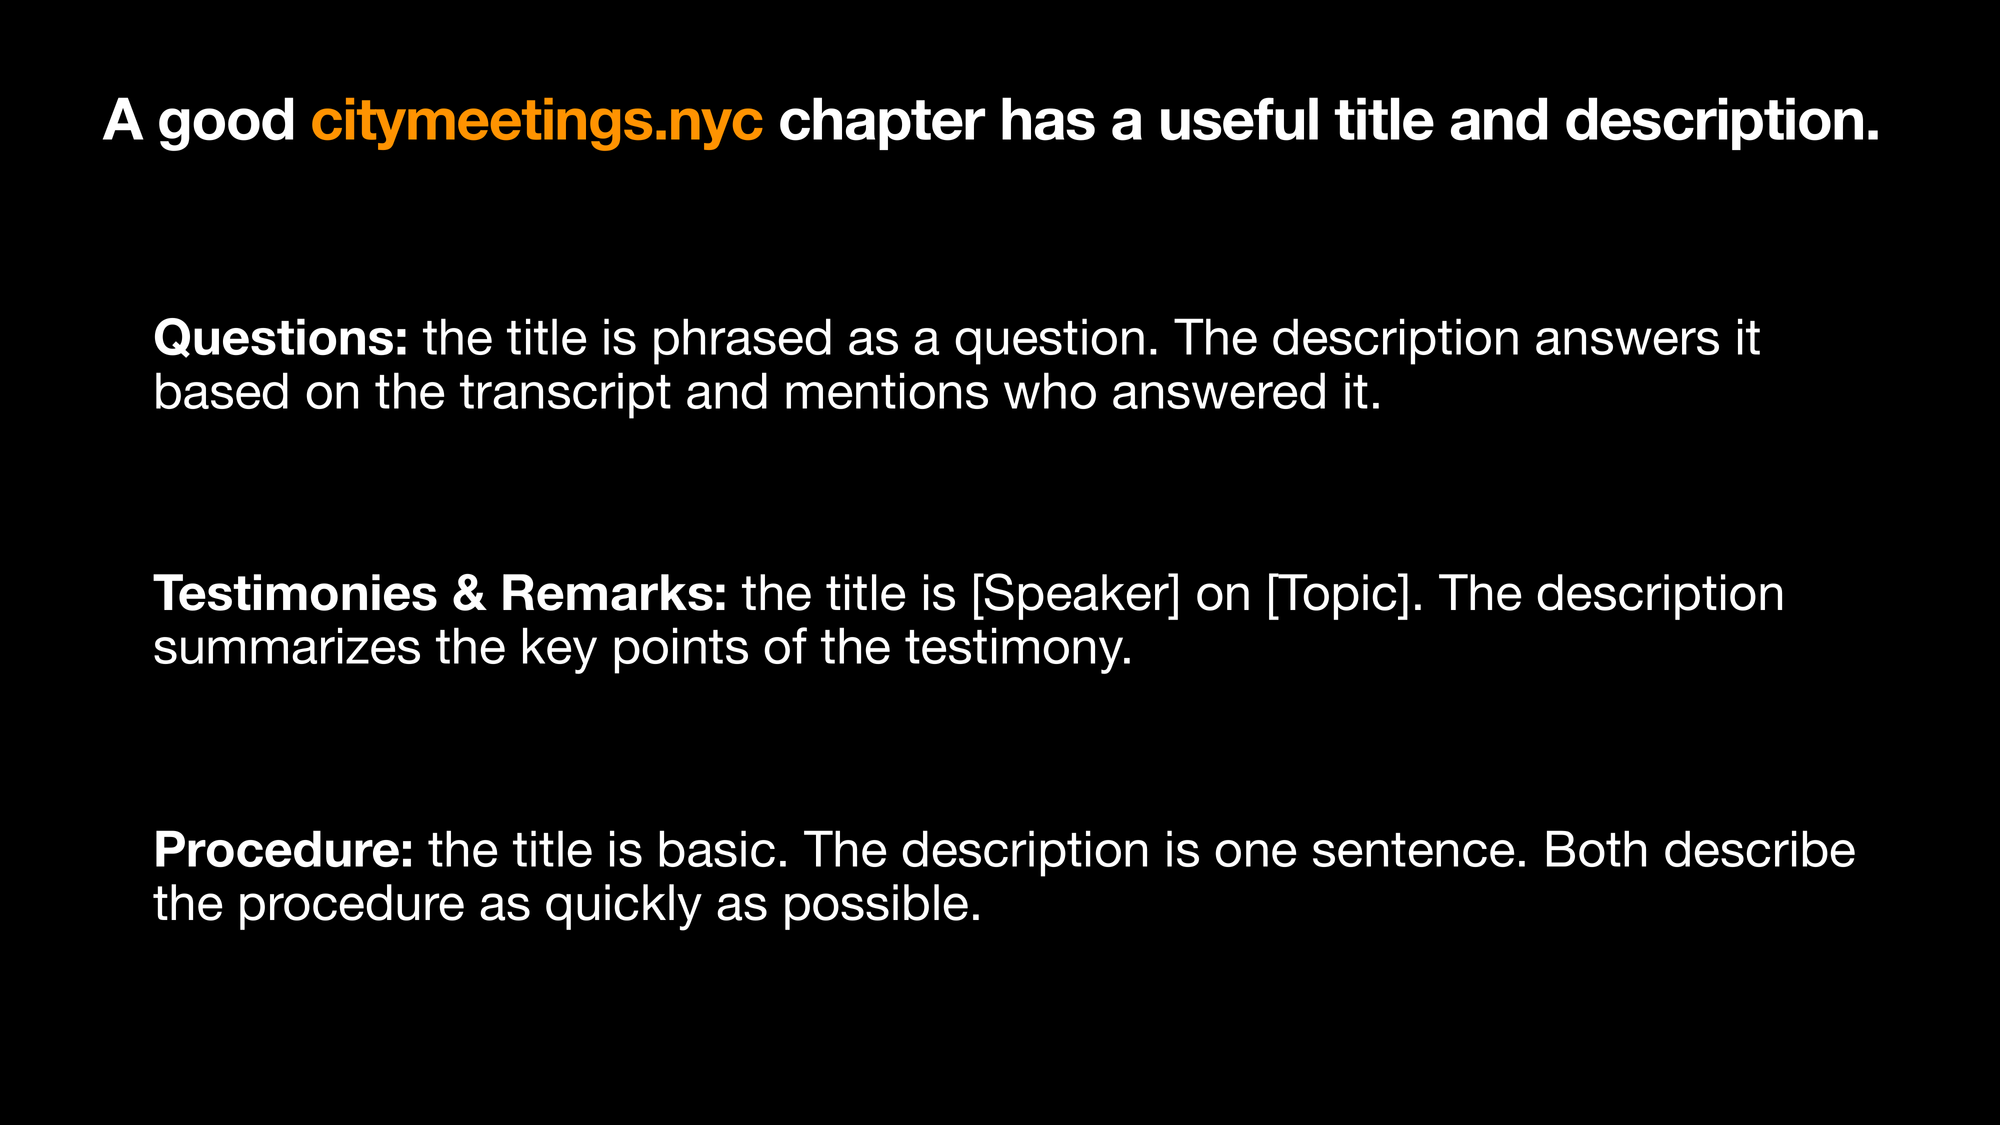 A good citymeetings.nyc chapter has a useful title and description. Questions: the title is phrased as a question. The description answers it
based on the transcript and mentions who answered it. Testimonies  Remarks: the title is [Speaker] on [Topic]. The description summarizes the key points of the testimony. Procedure: the title is basic. The description is one sentence. Both describe the procedure as quickly as possible.